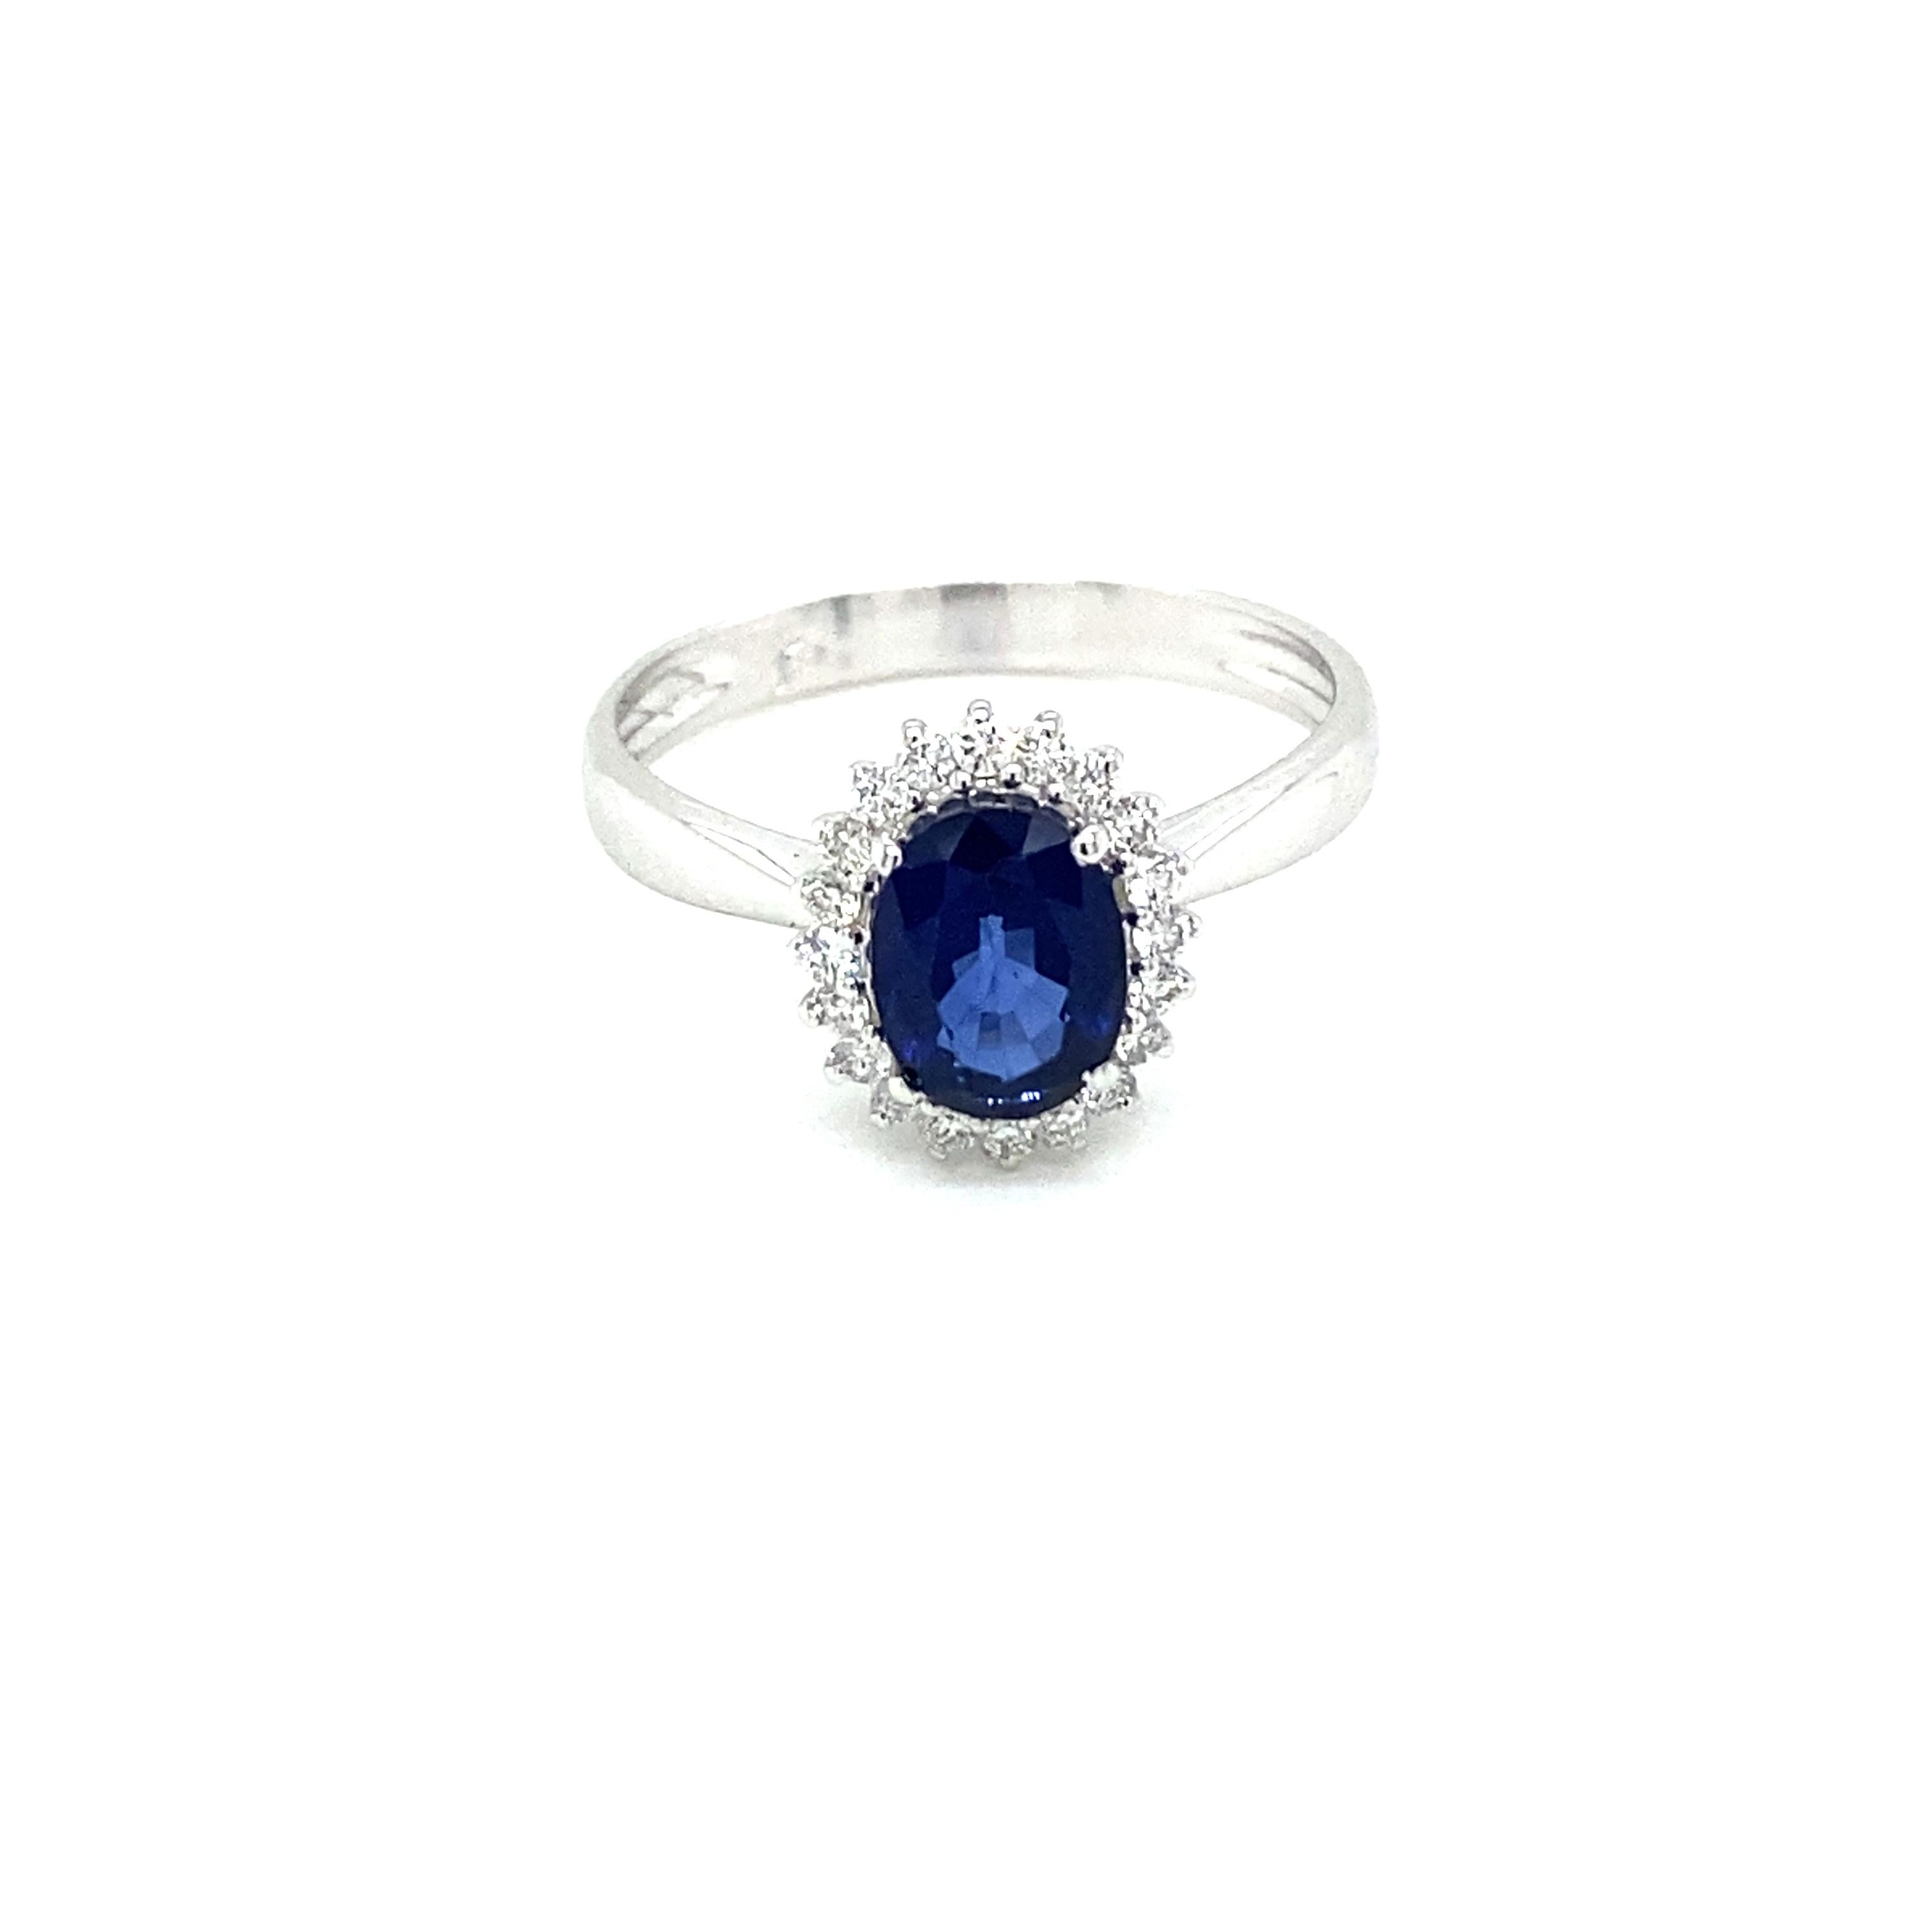 Elegant 18k white Gold, Sapphire and Diamond cluster Ring.

It is set in the center with a Bright oval-cut Natural Sapphire weighing 1,40 carats of extraordinary color and clarity, flanked by sparkling Round Brilliant cut diamonds weighing 0,20